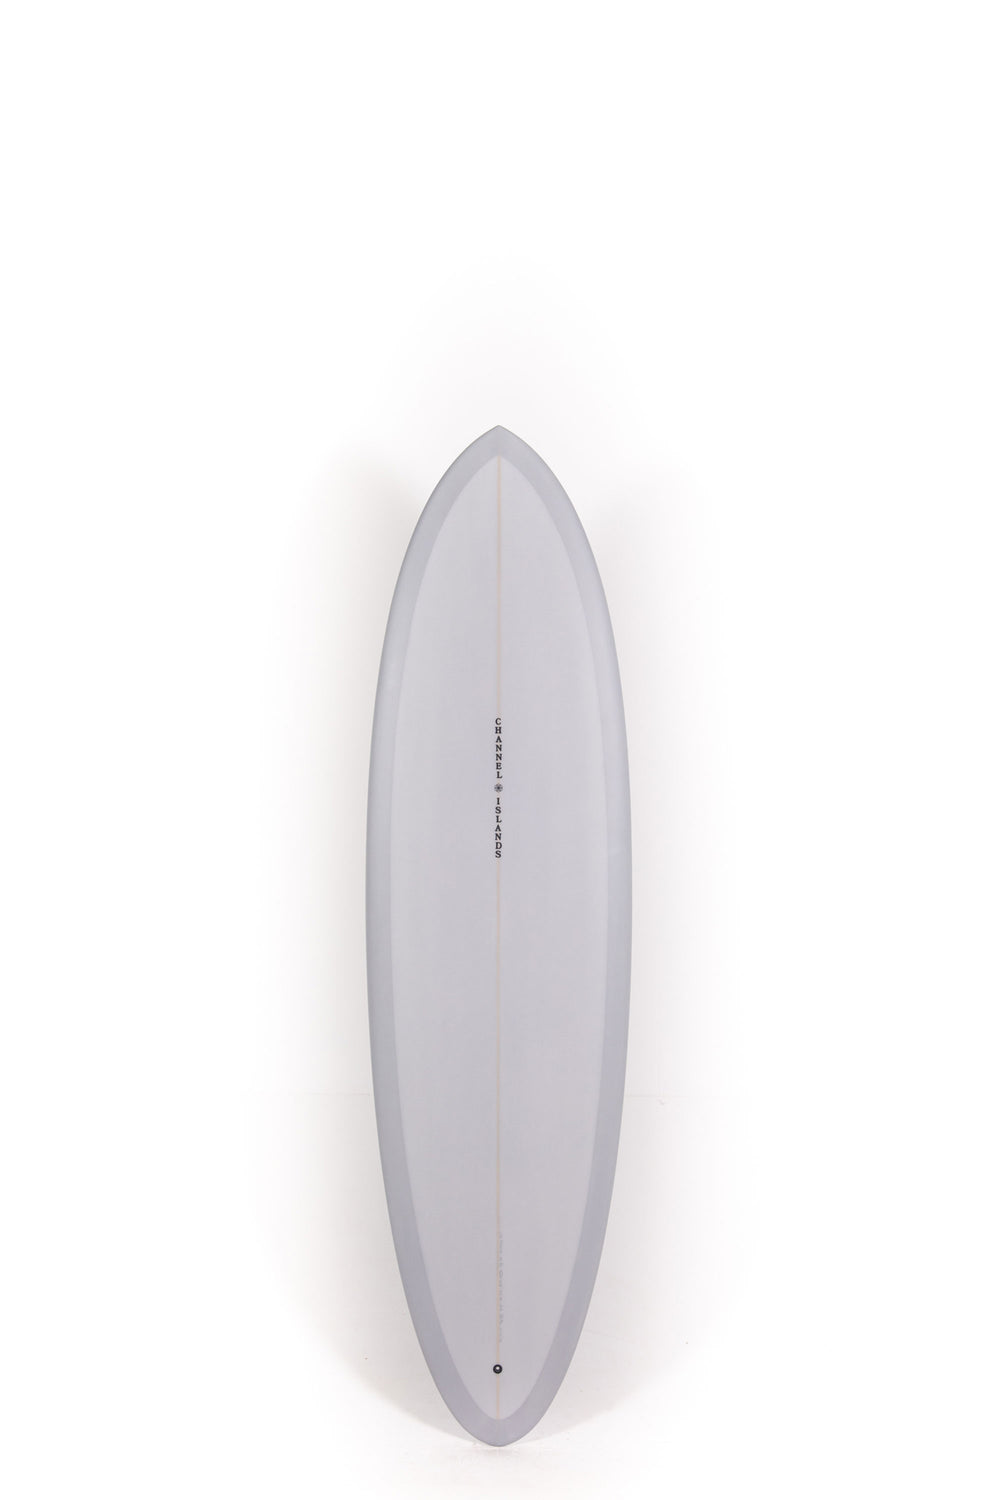 Channel Islands | CI MID | Buy at PUKAS SURF SHOP